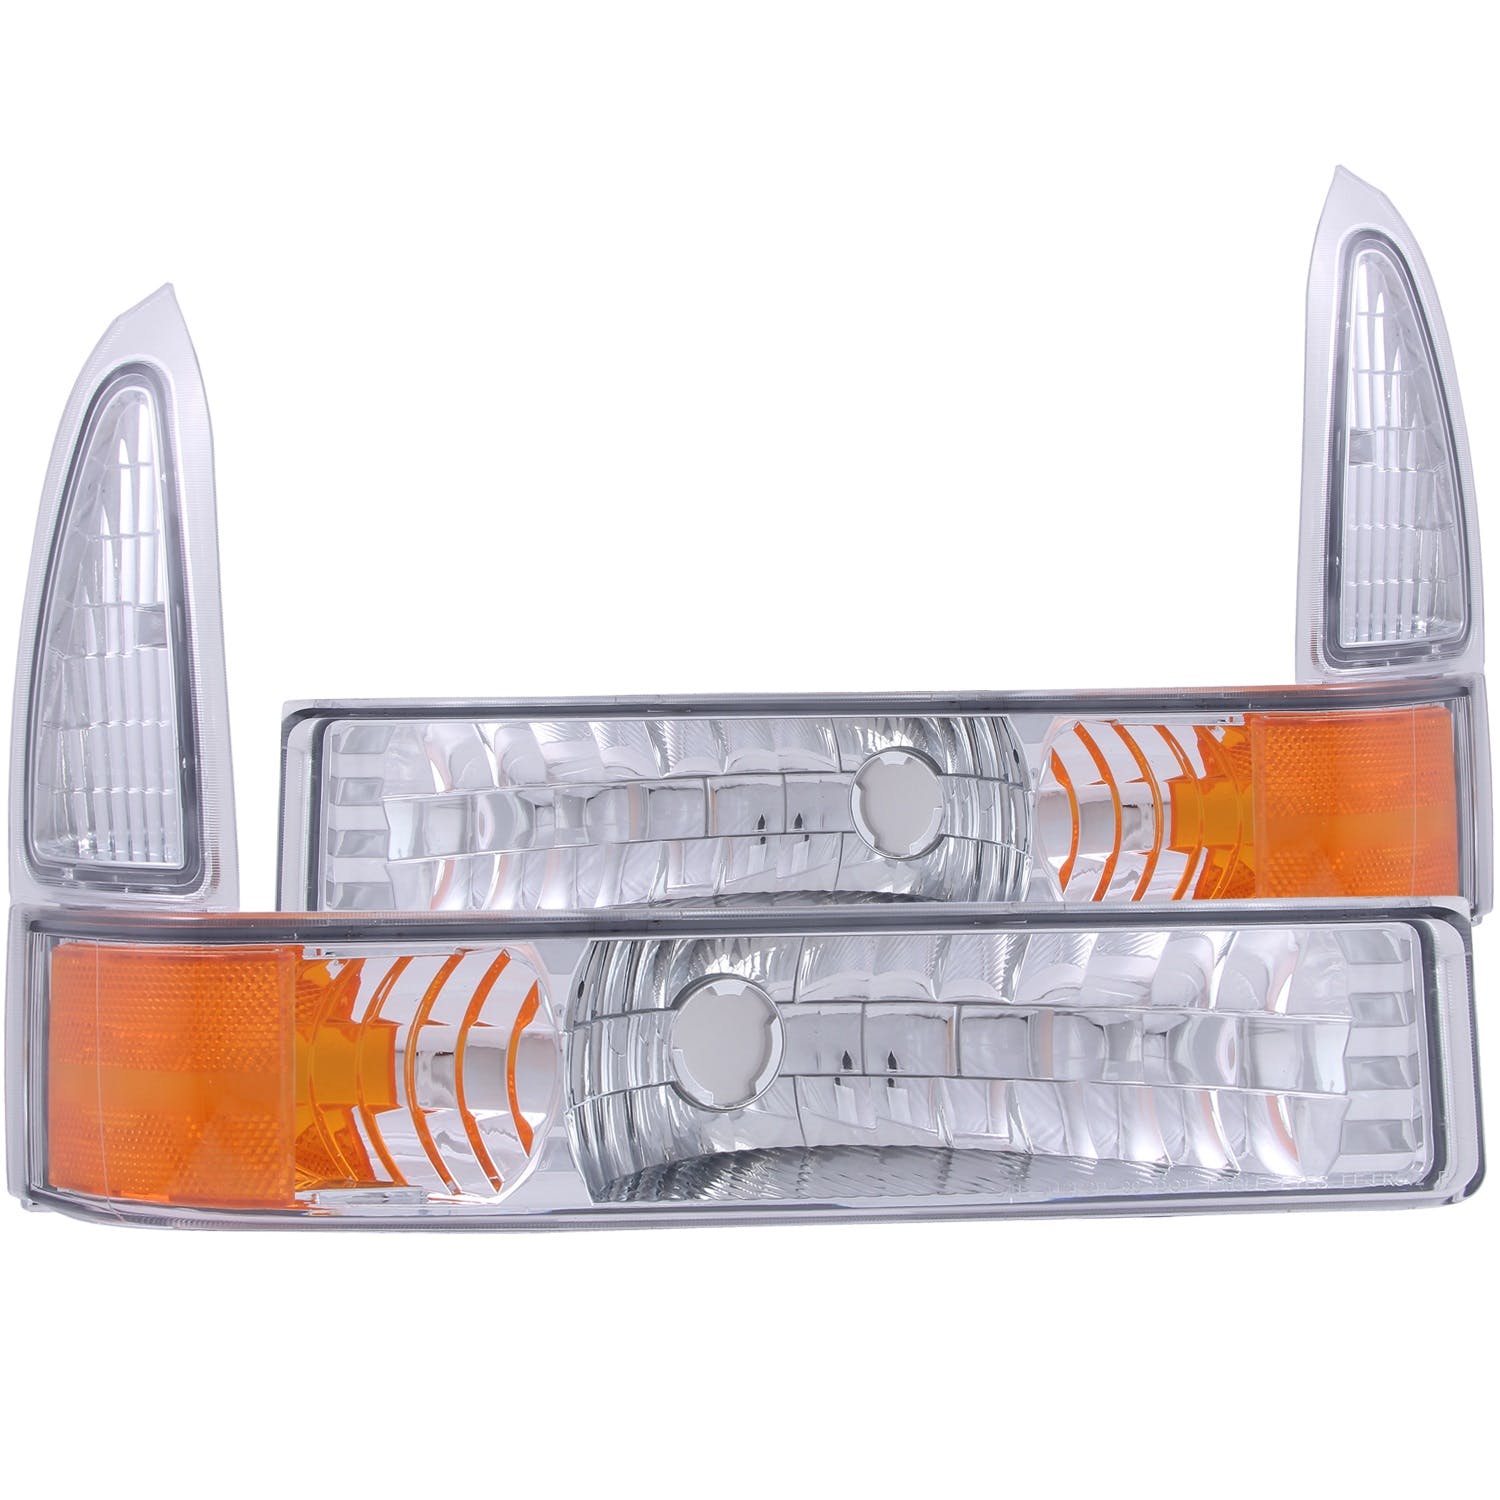 AnzoUSA 511039 Euro Parking Lights Chrome with Amber Reflector